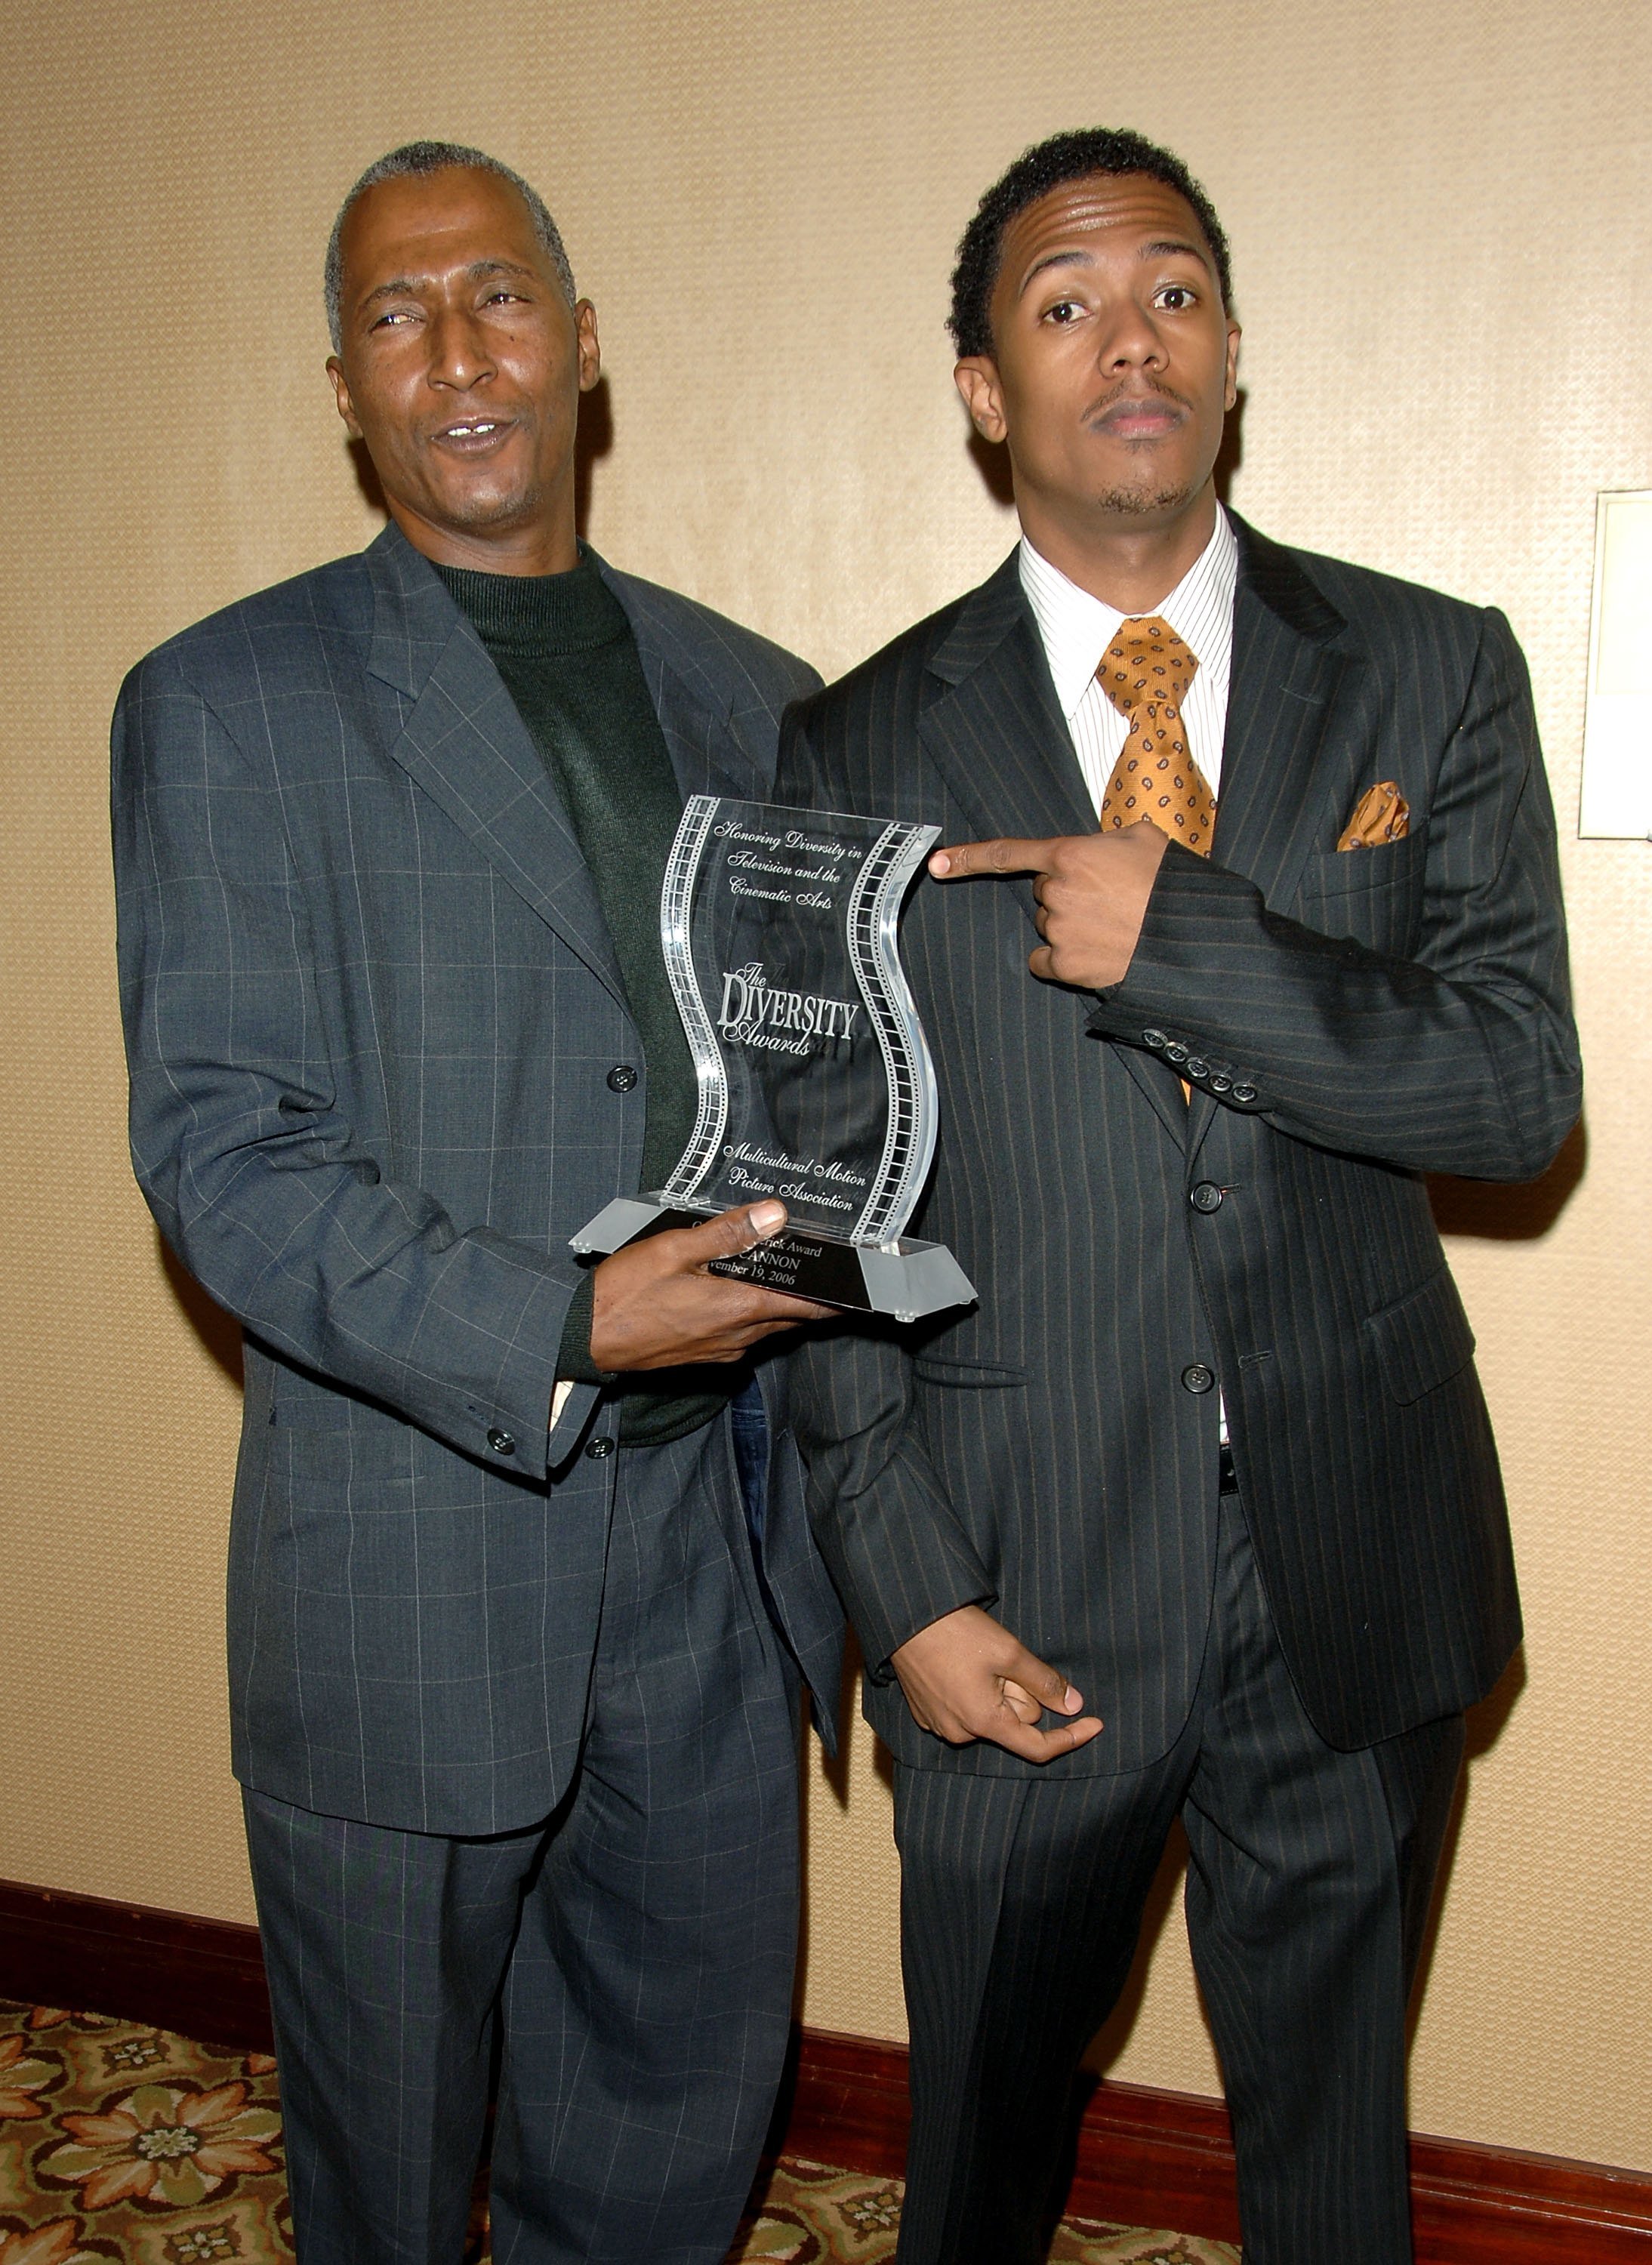 Nick Cannon and his father pose backstage at the 14th Annual Diversity Awards Gala held at the Century Plaza Hotel on November 19, 2006, in Los Angeles, California. | Source: Getty Images